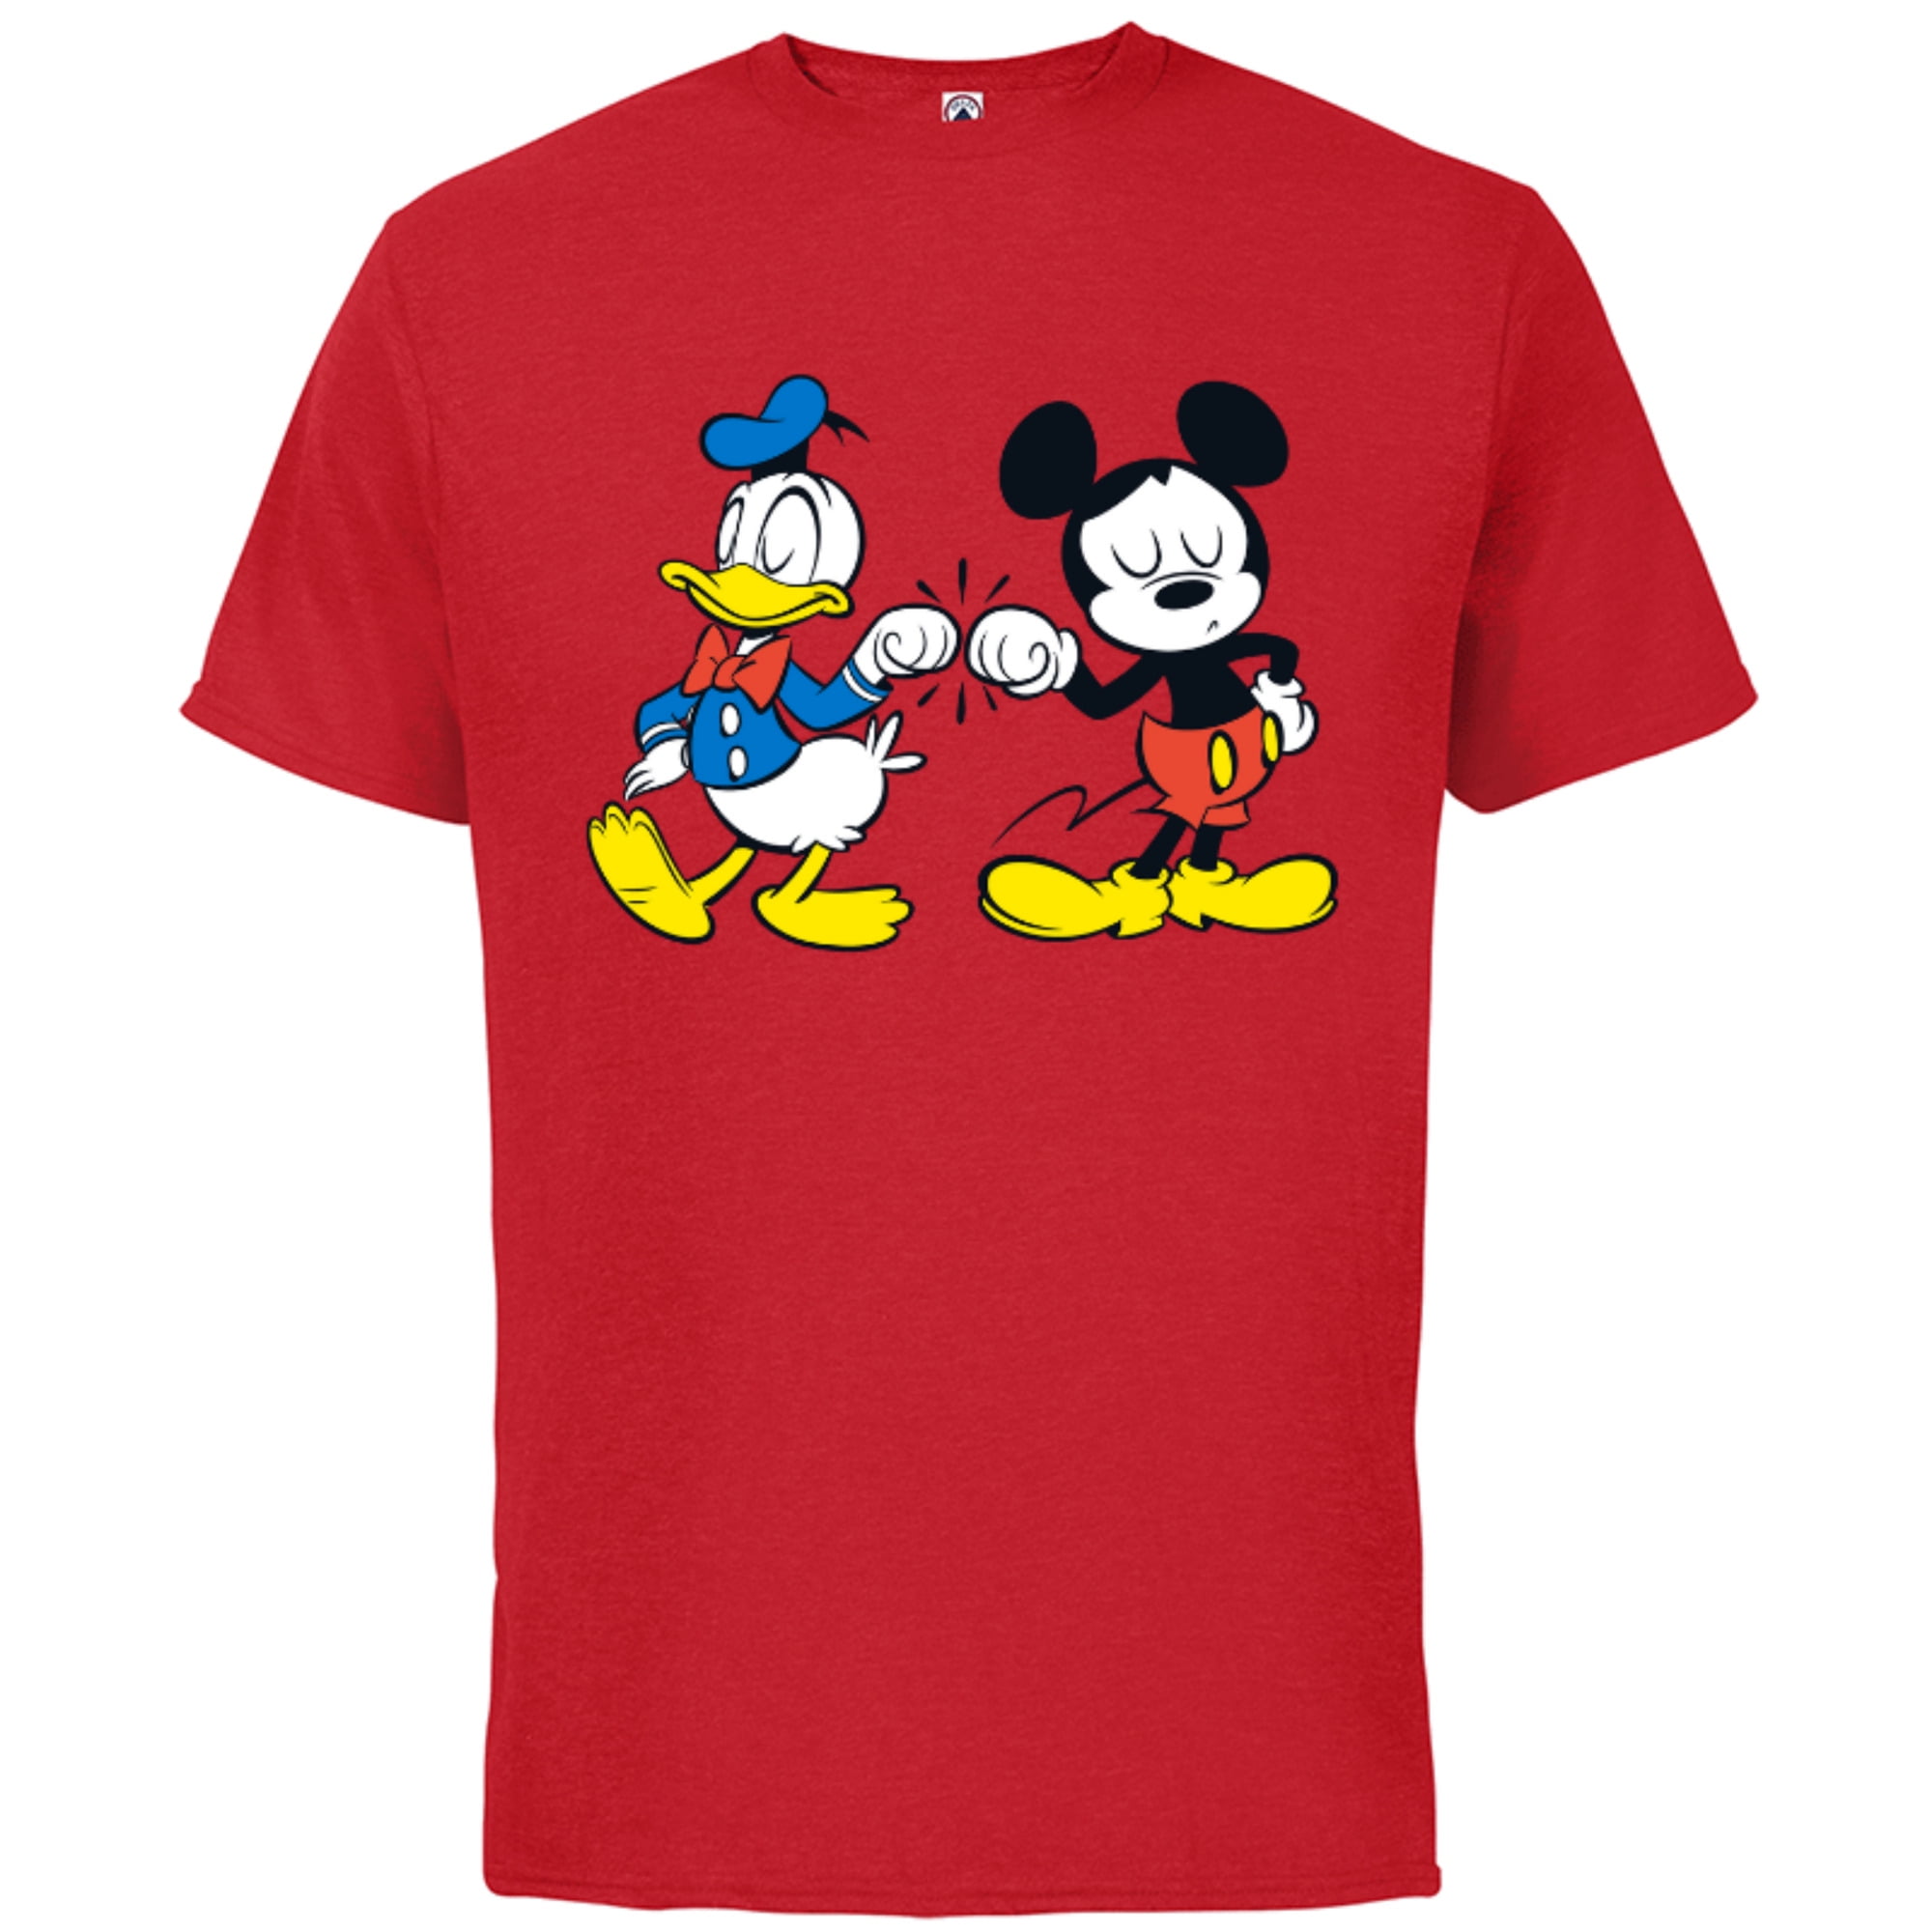 Official Licensed Disney Mickey Mouse Side Burst T-Shirt Toddler Red 